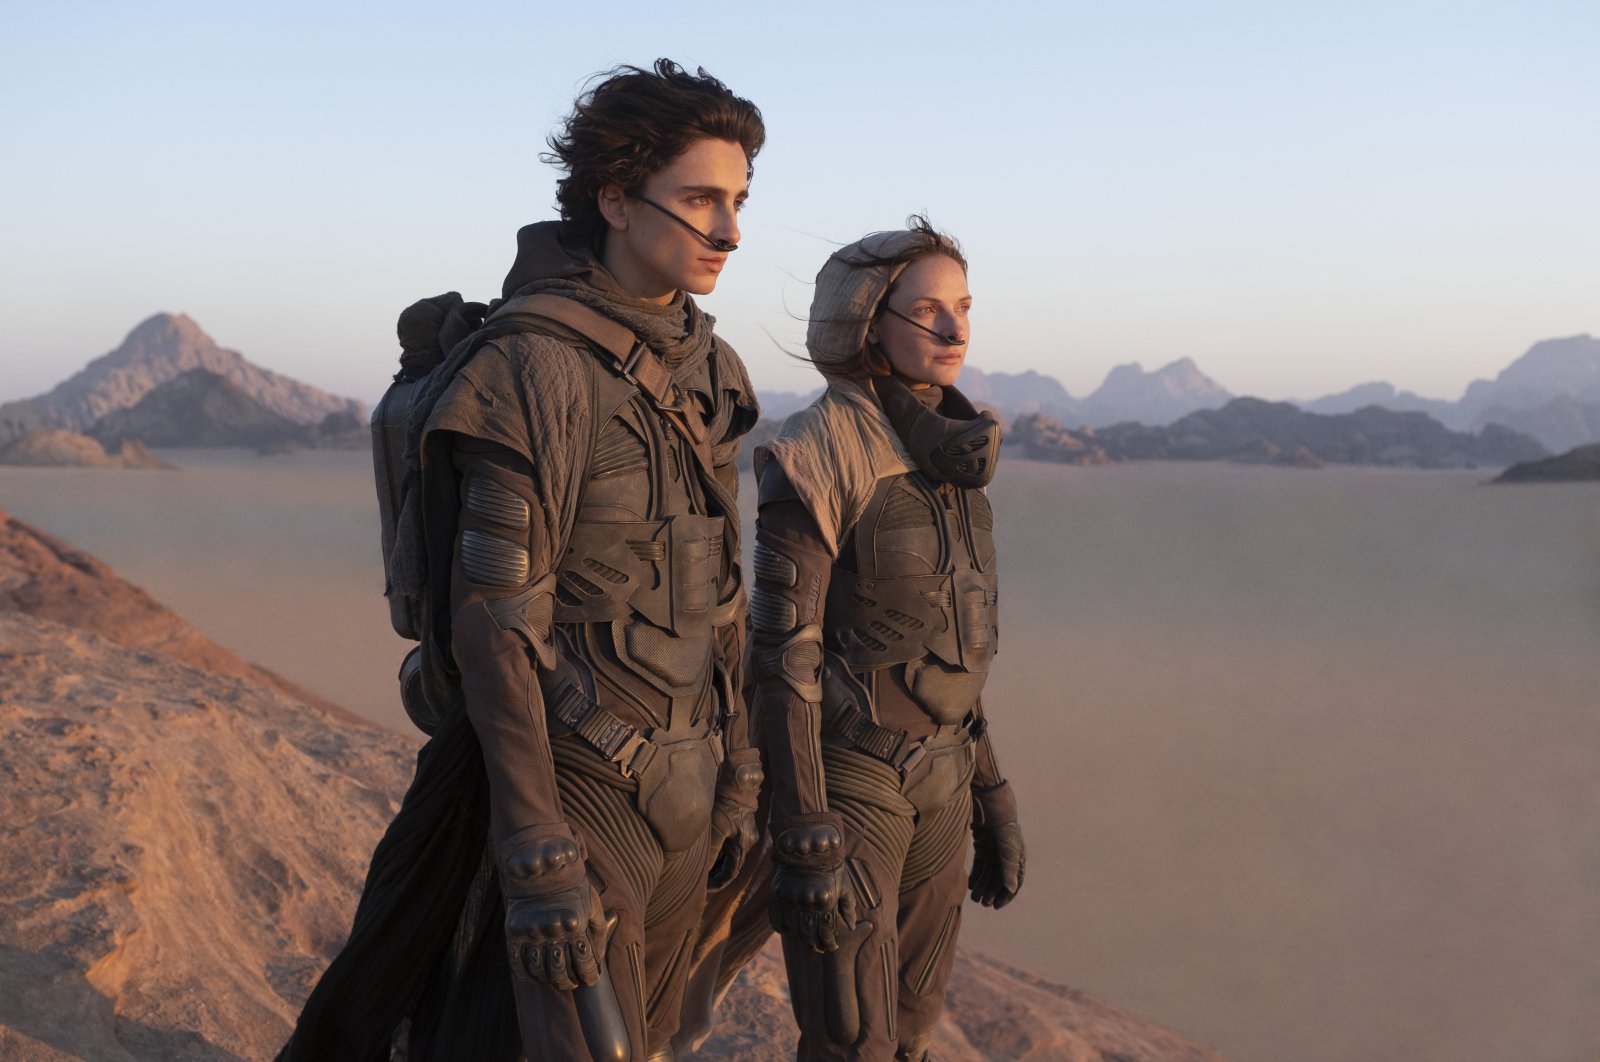 Timothee Chalamet (L), and Rebecca Ferguson look off into the distance, in a scene from the film "Dune." (Warner Bros. via AP)